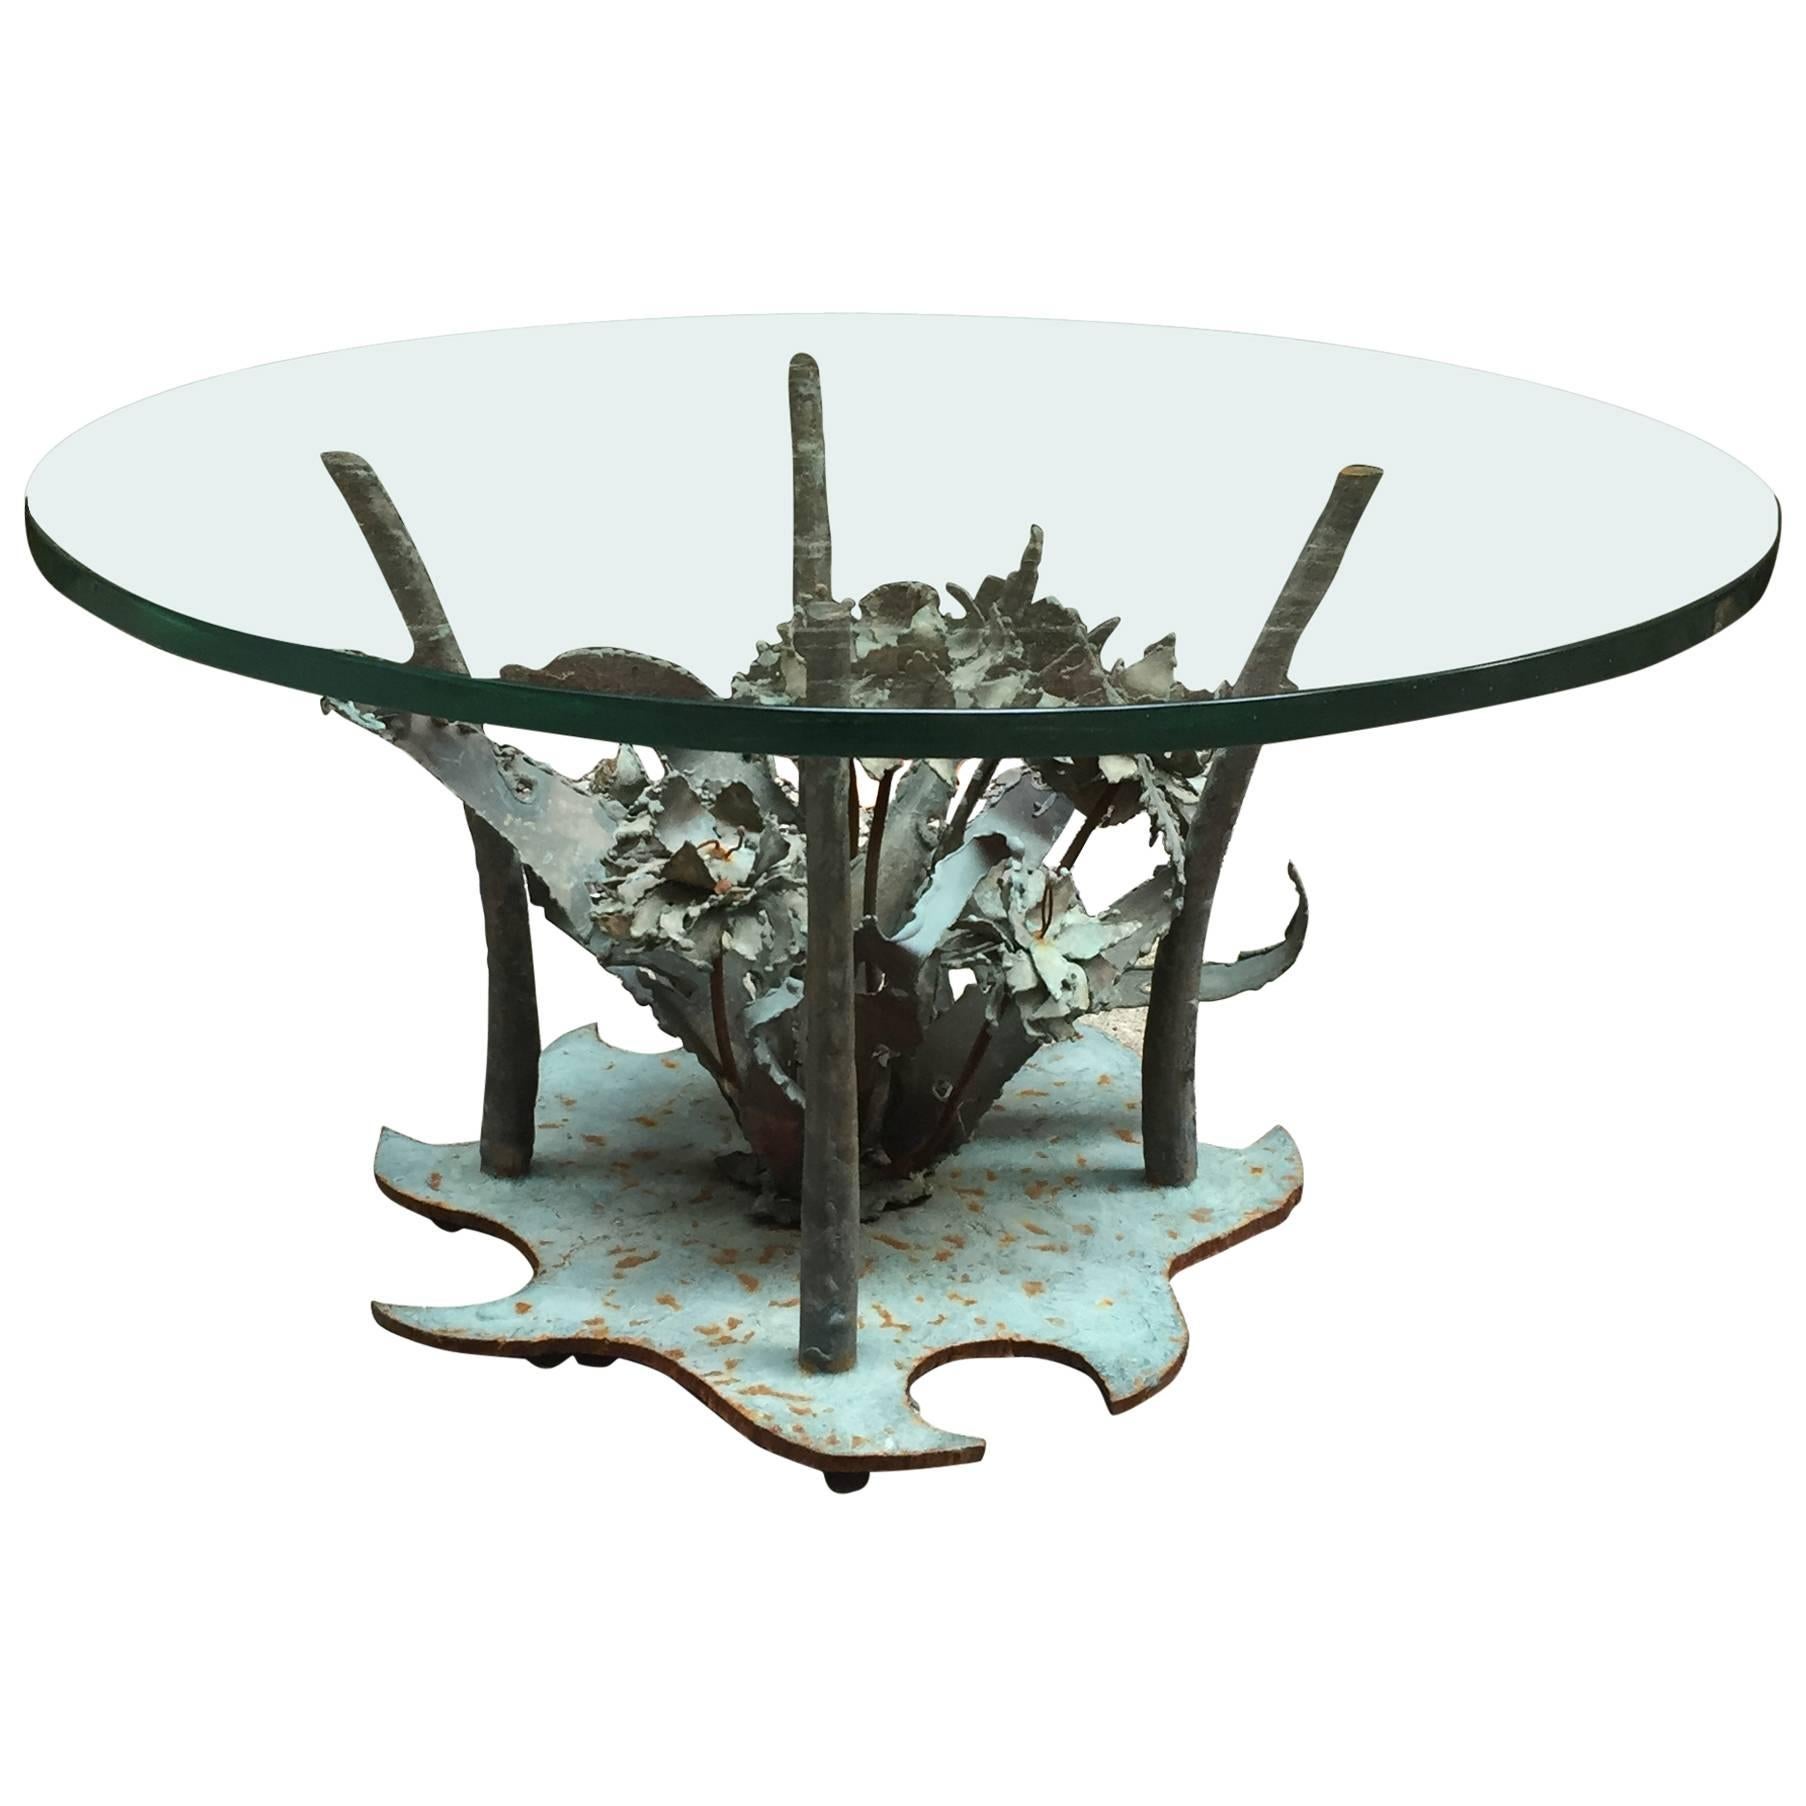 Silas Seandel Brutalist Torch Cut Brutalist Copper and Steel Floral Coffee Table